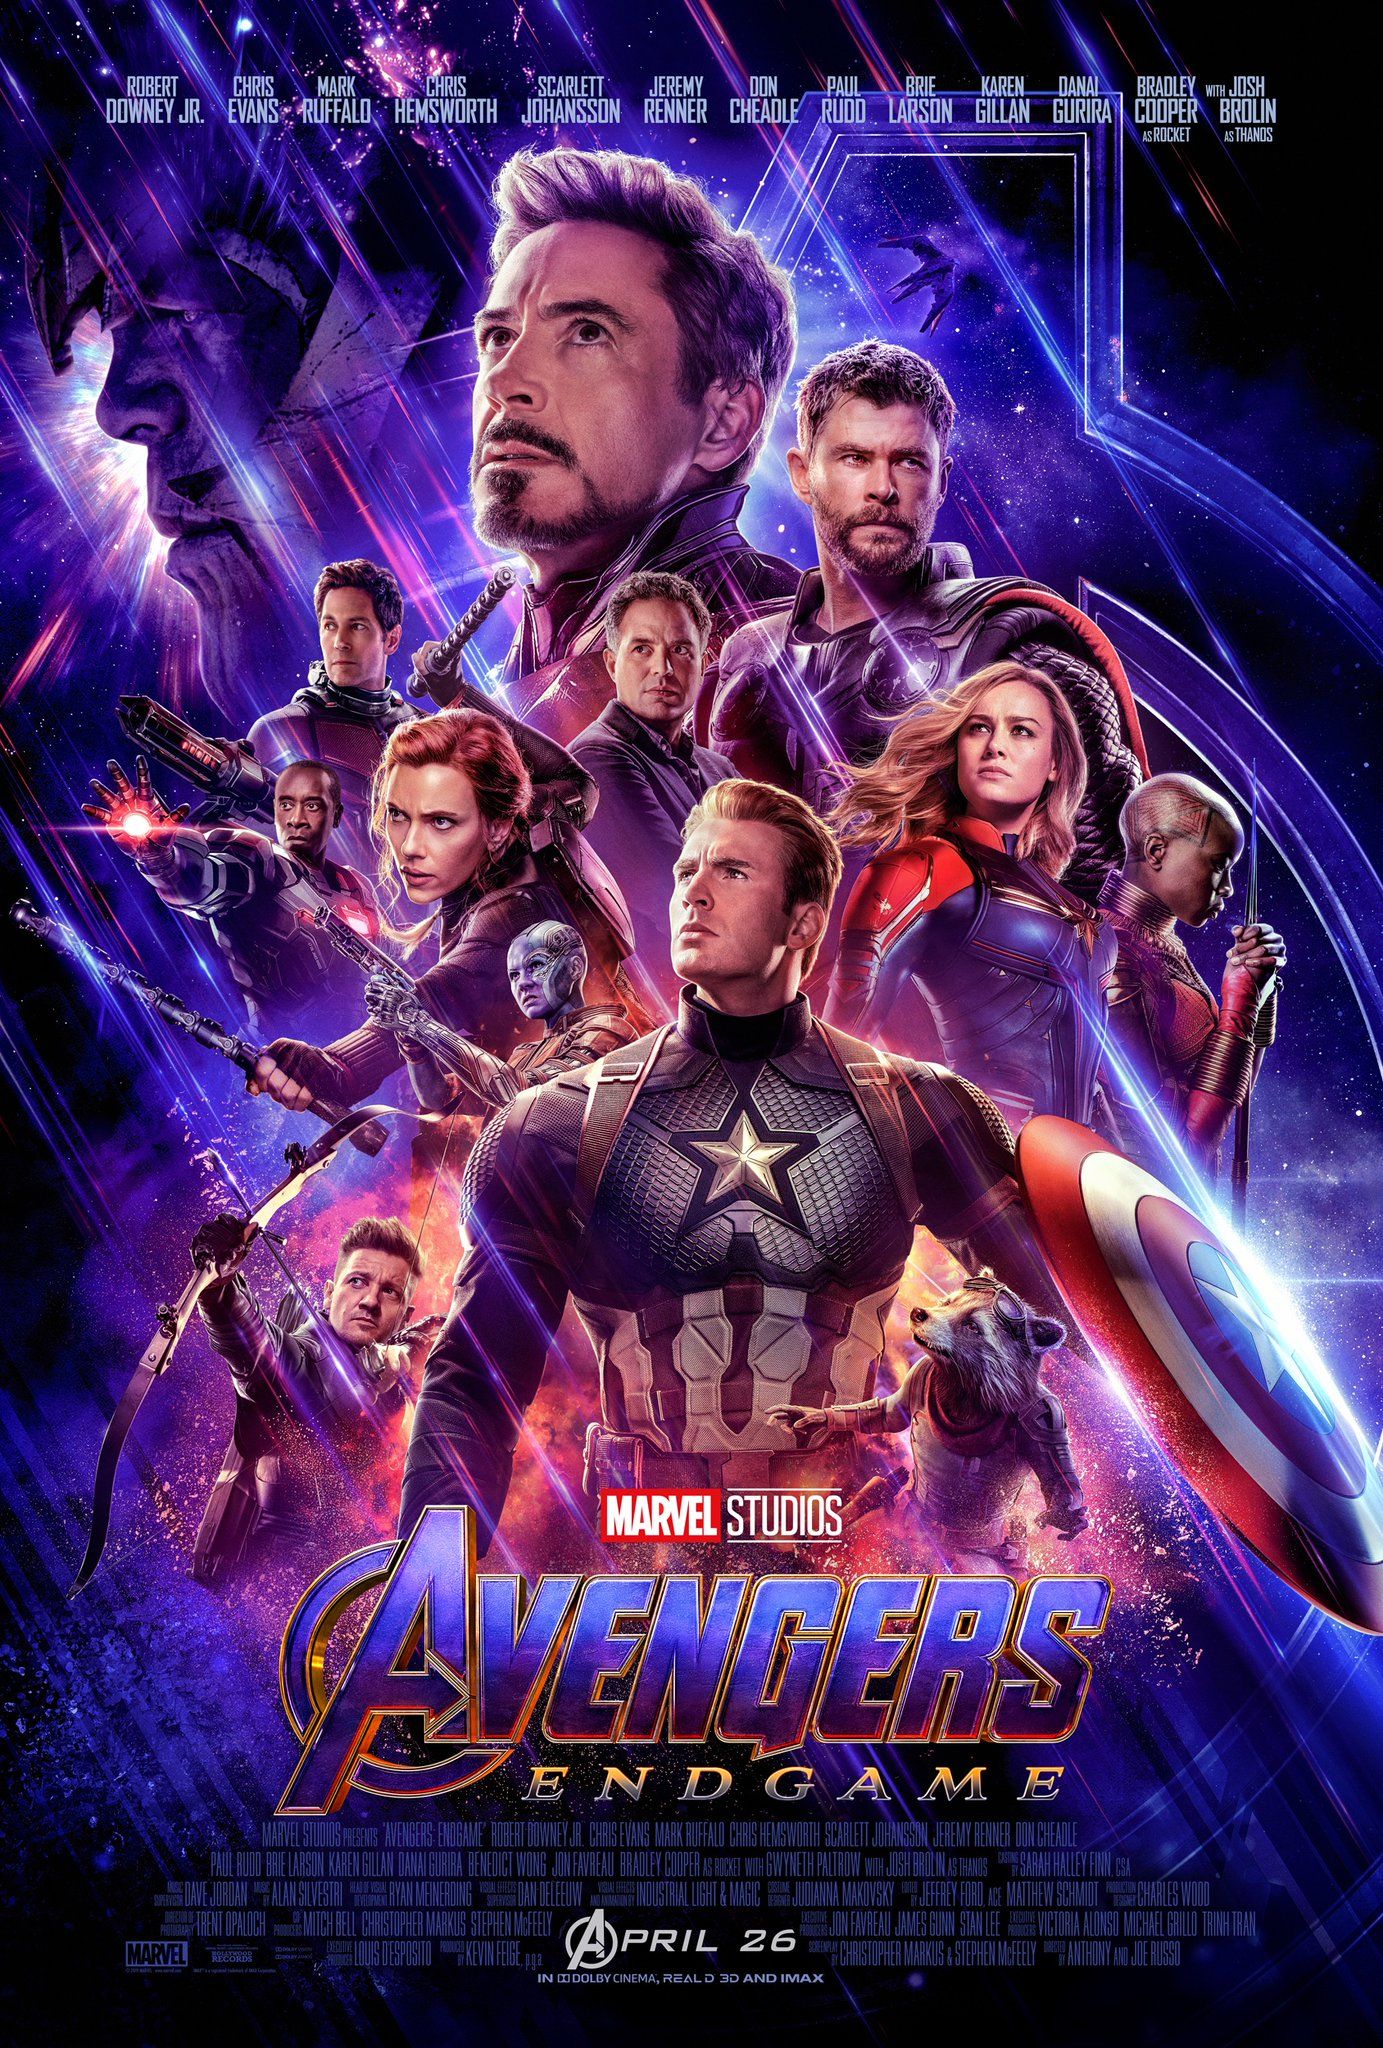 Avengers: Endgame Poster Controversy - Marvel Changed the Avengers ...